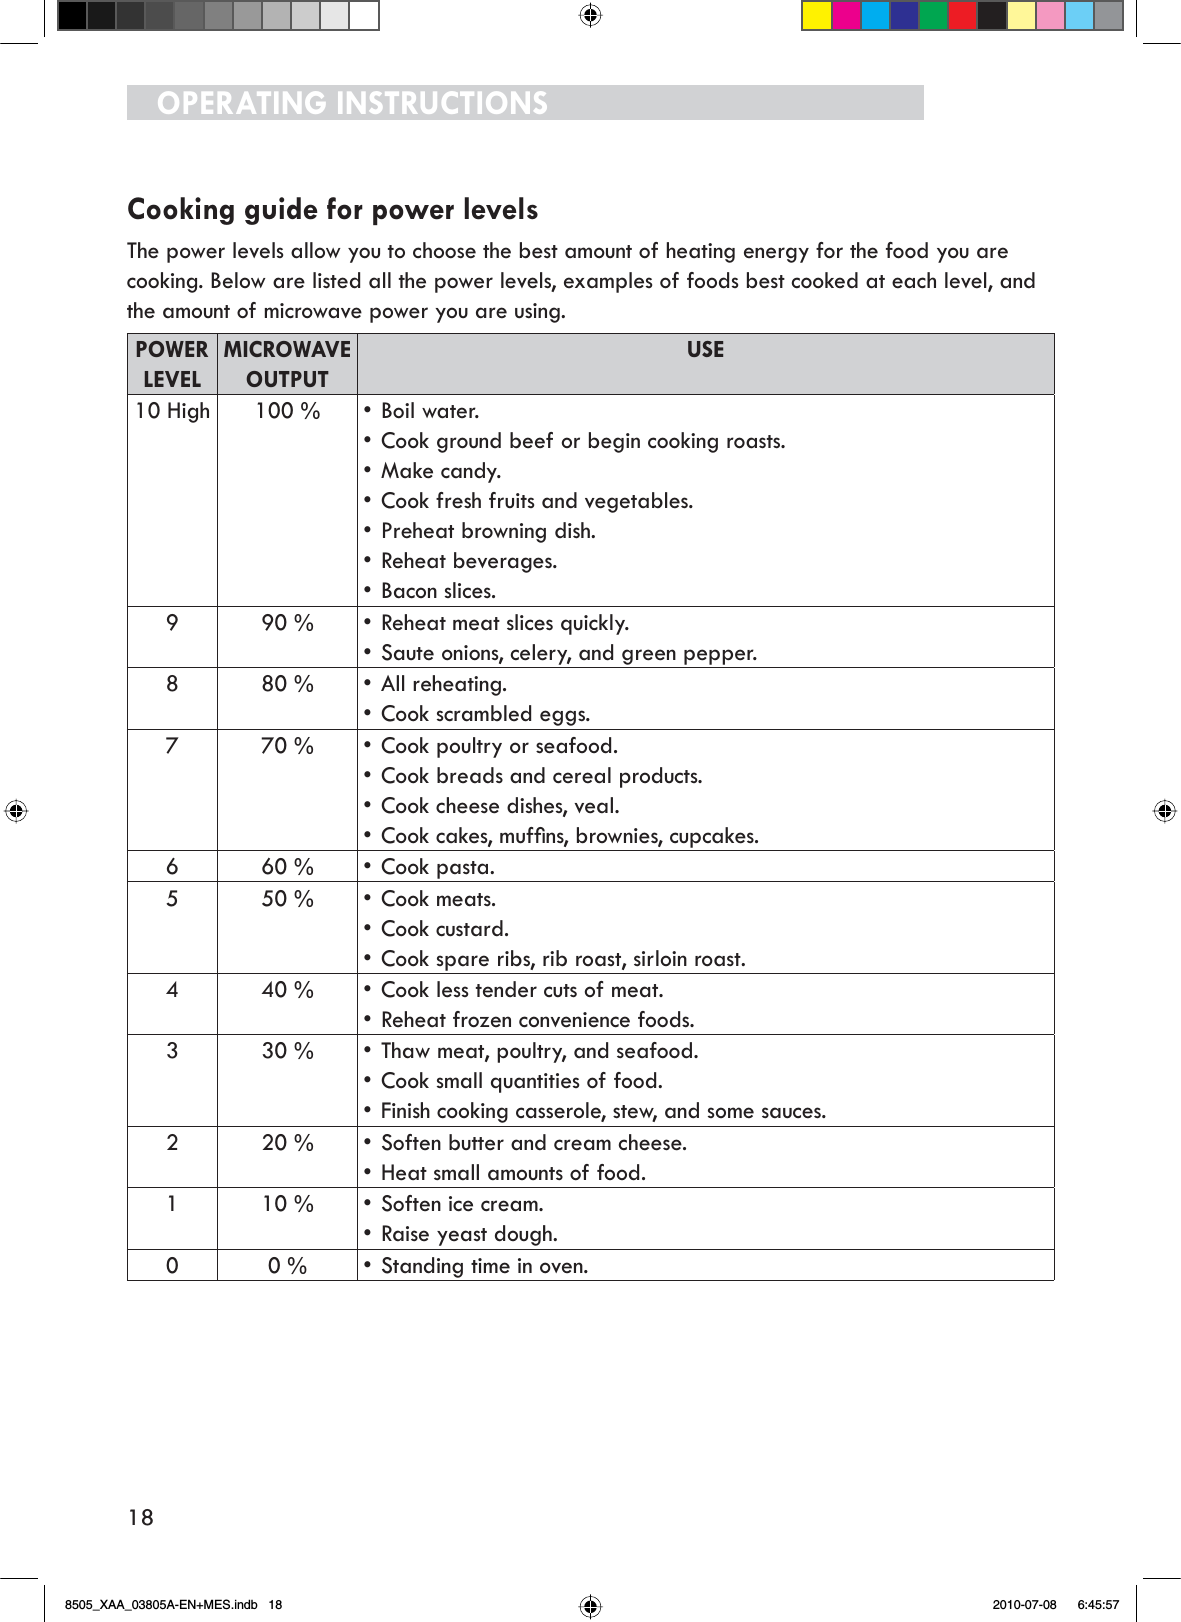 18OPERATING INSTRUCTIONSCooking guide for power levelsThe power levels allow you to choose the best amount of heating energy for the food you are cooking. Below are listed all the power levels, examples of foods best cooked at each level, and the amount of microwave power you are using.POWER LEVELMICROWAVE OUTPUTUSE10 High 100 % Boil water.Cook ground beef or begin cooking roasts.Make candy.Cook fresh fruits and vegetables.Preheat browning dish.Reheat beverages.Bacon slices.9 90 % Reheat meat slices quickly.Saute onions, celery, and green pepper.8 80 % All reheating.Cook scrambled eggs.7 70 % Cook poultry or seafood.Cook breads and cereal products.Cook cheese dishes, veal.&amp;RRNFDNHVPXIÀQVEURZQLHVFXSFDNHV6 60 % Cook pasta.5 50 % Cook meats.Cook custard.Cook spare ribs, rib roast, sirloin roast.4 40 % Cook less tender cuts of meat.Reheat frozen convenience foods.3 30 % Thaw meat, poultry, and seafood.Cook small quantities of food.Finish cooking casserole, stew, and some sauces.2 20 % Soften butter and cream cheese.Heat small amounts of food.1 10 % Soften ice cream.Raise yeast dough.0 0 % Standing time in oven.8505_XAA_03805A-EN+MES.indb   18 2010-07-08     6:45:57